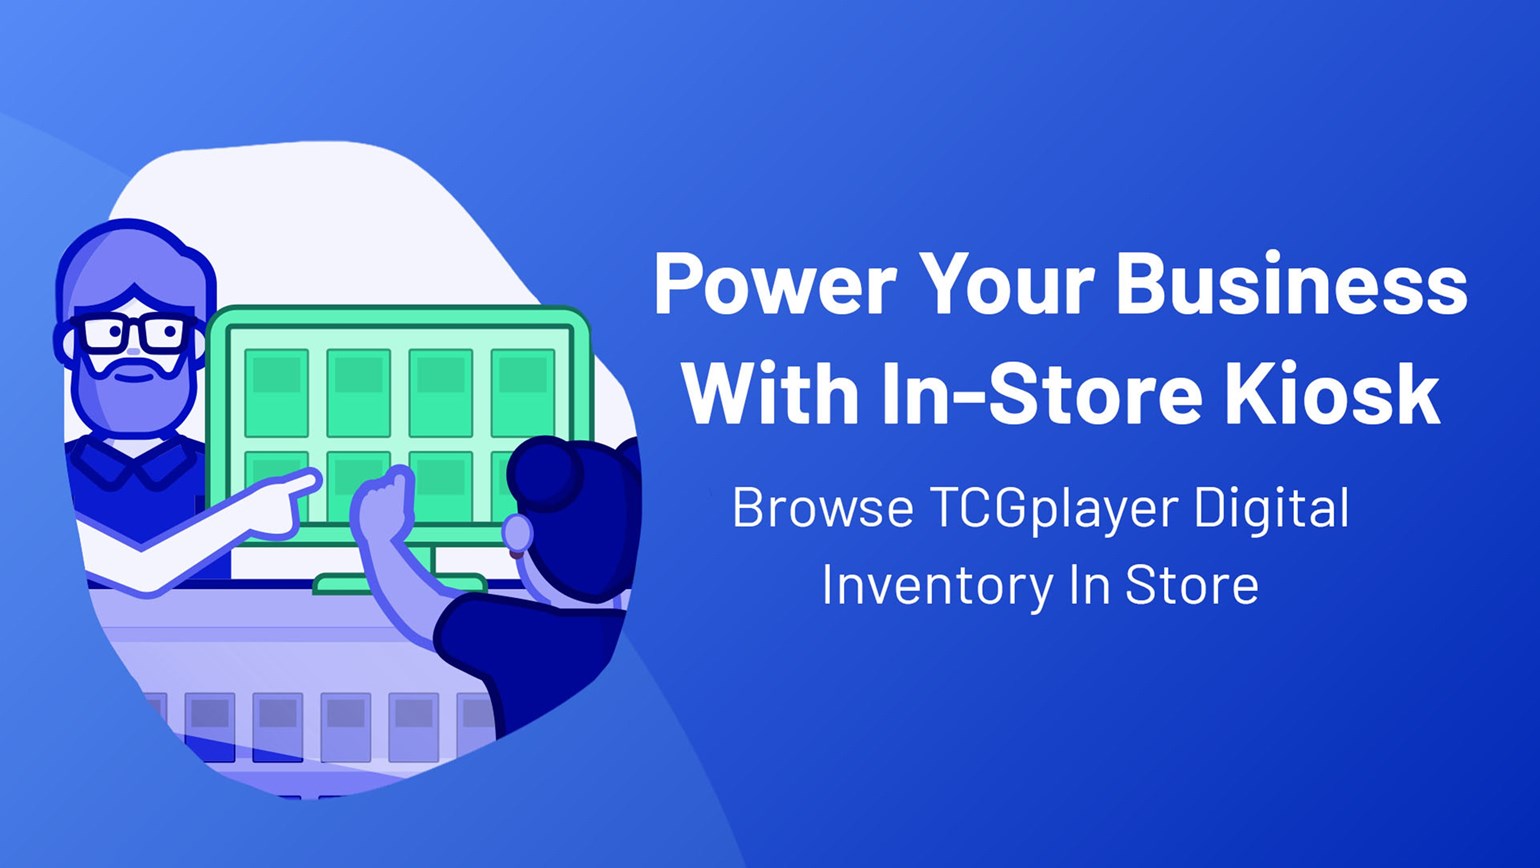 Power Your Business With In-Store Kiosk: Browse TCGplayer Digital Inventory In Store